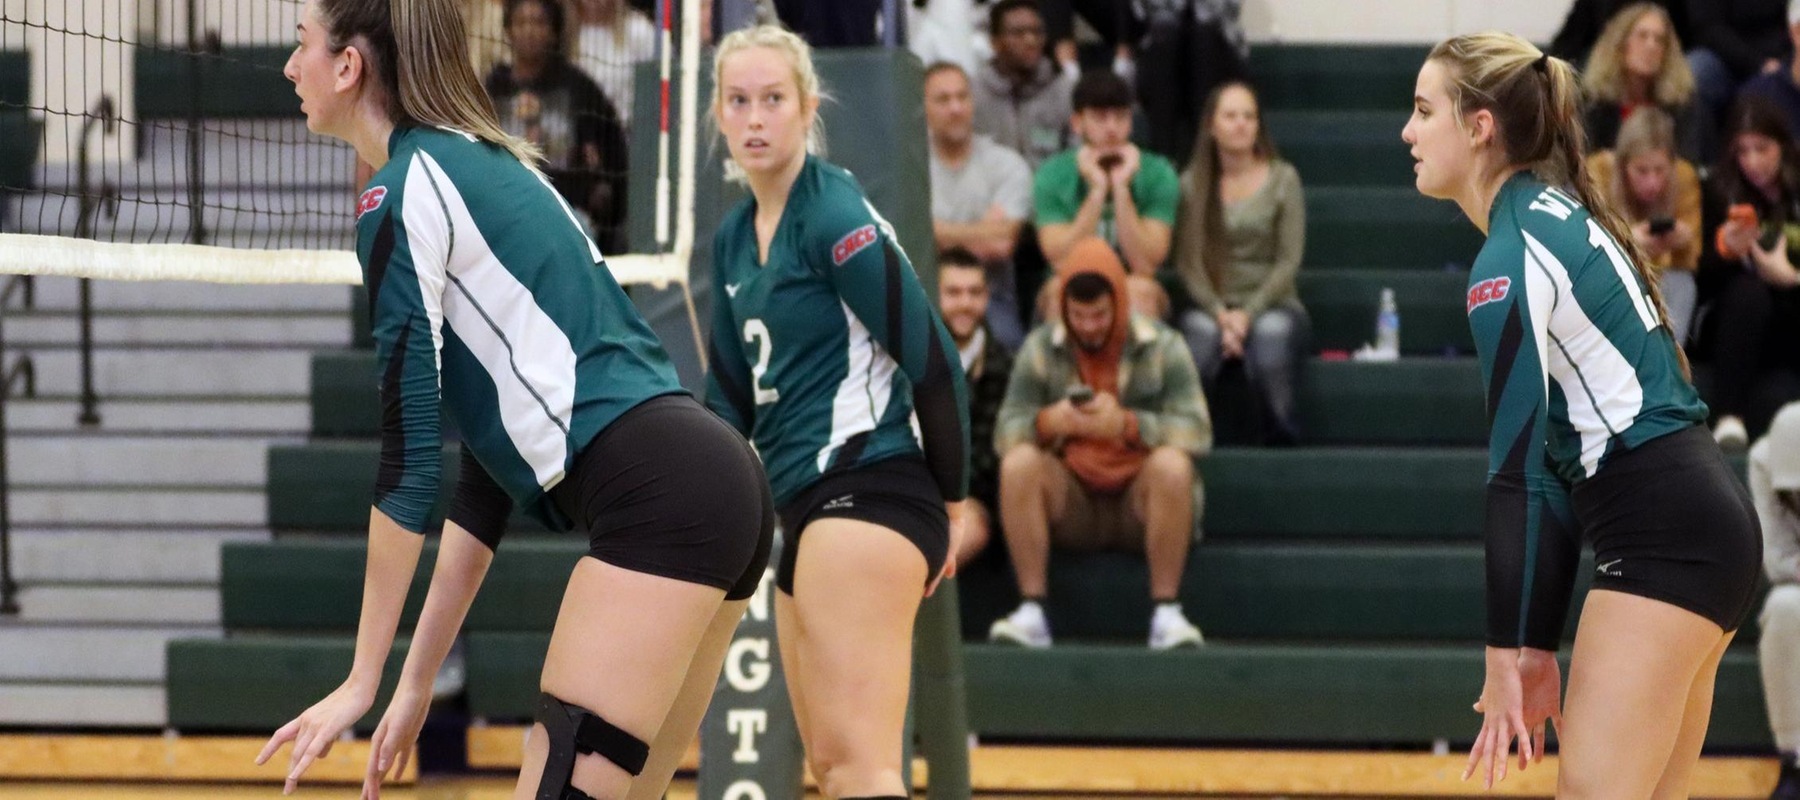 Chestnut Hill Picks Up 3-1 CACC South Division Victory over WilmU Volleyball